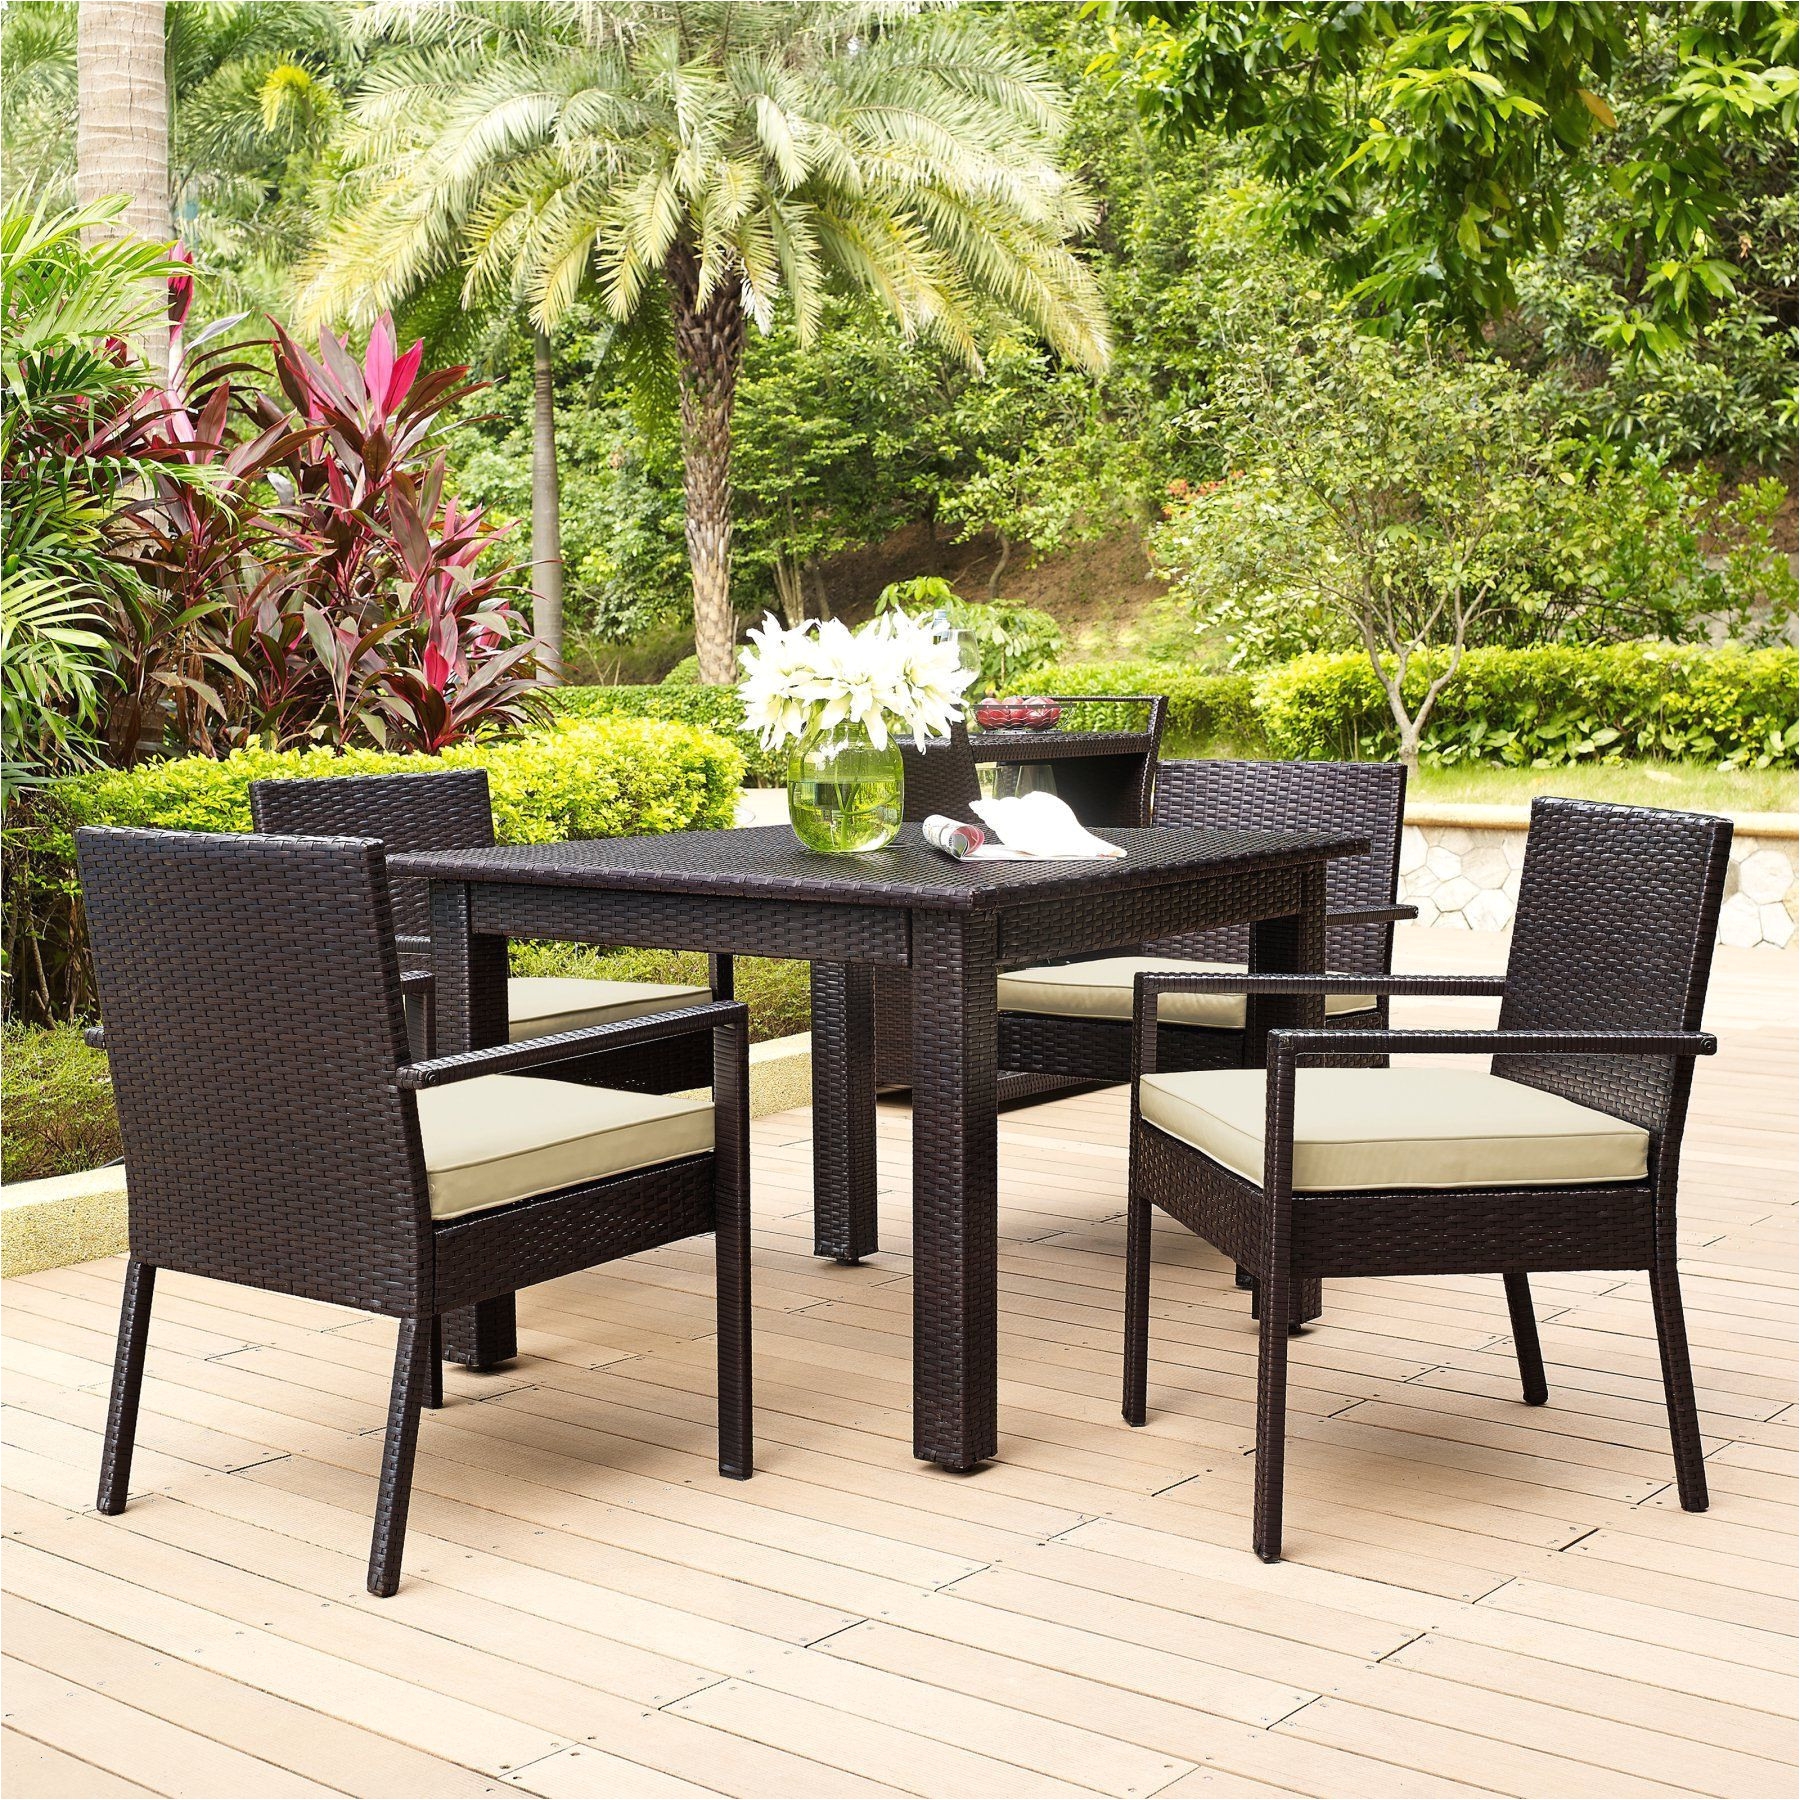 target outdoor furniture clearance lovely popular tar outdoor furniture bomelconsult